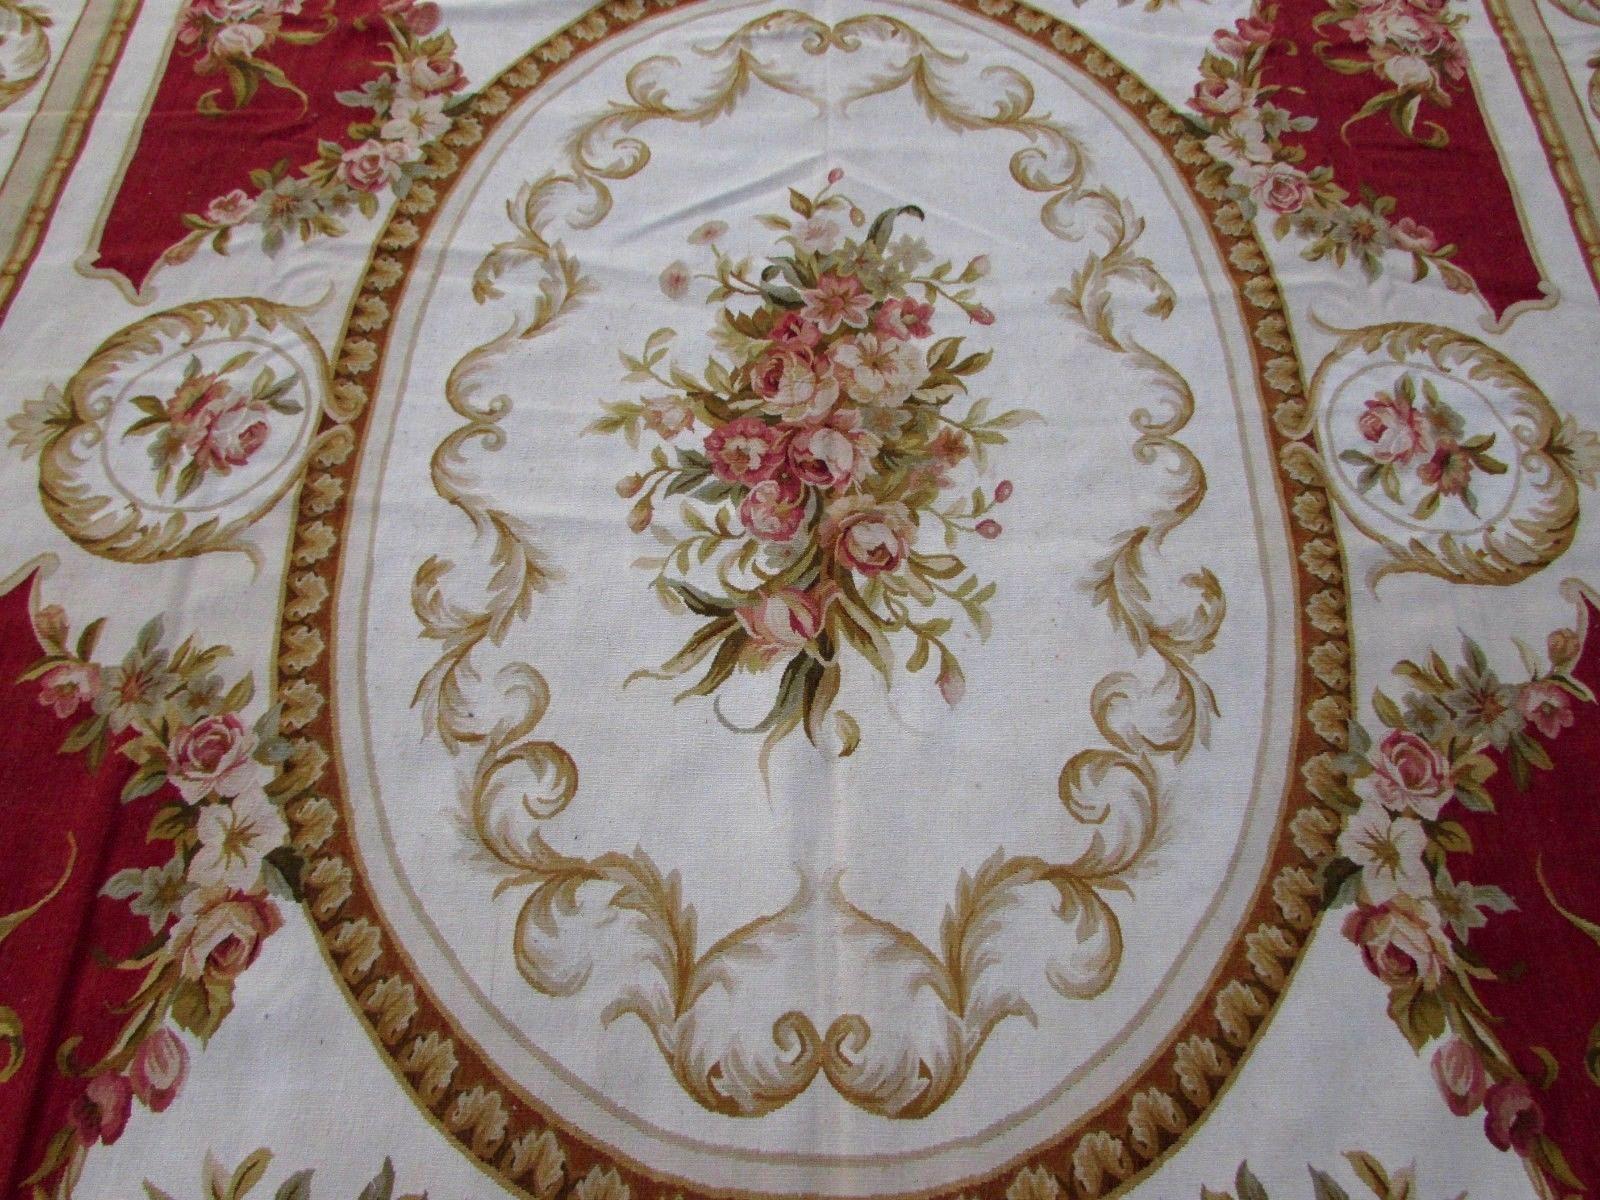 Handmade vintage French Aubusson rug made in wool. This rug has been made in the end of 20th century, it is in original good condition.

- Condition: original good,

- circa 1980s,

- Size: 9.1' x 12.5' (273cm x 372cm),

- Material: